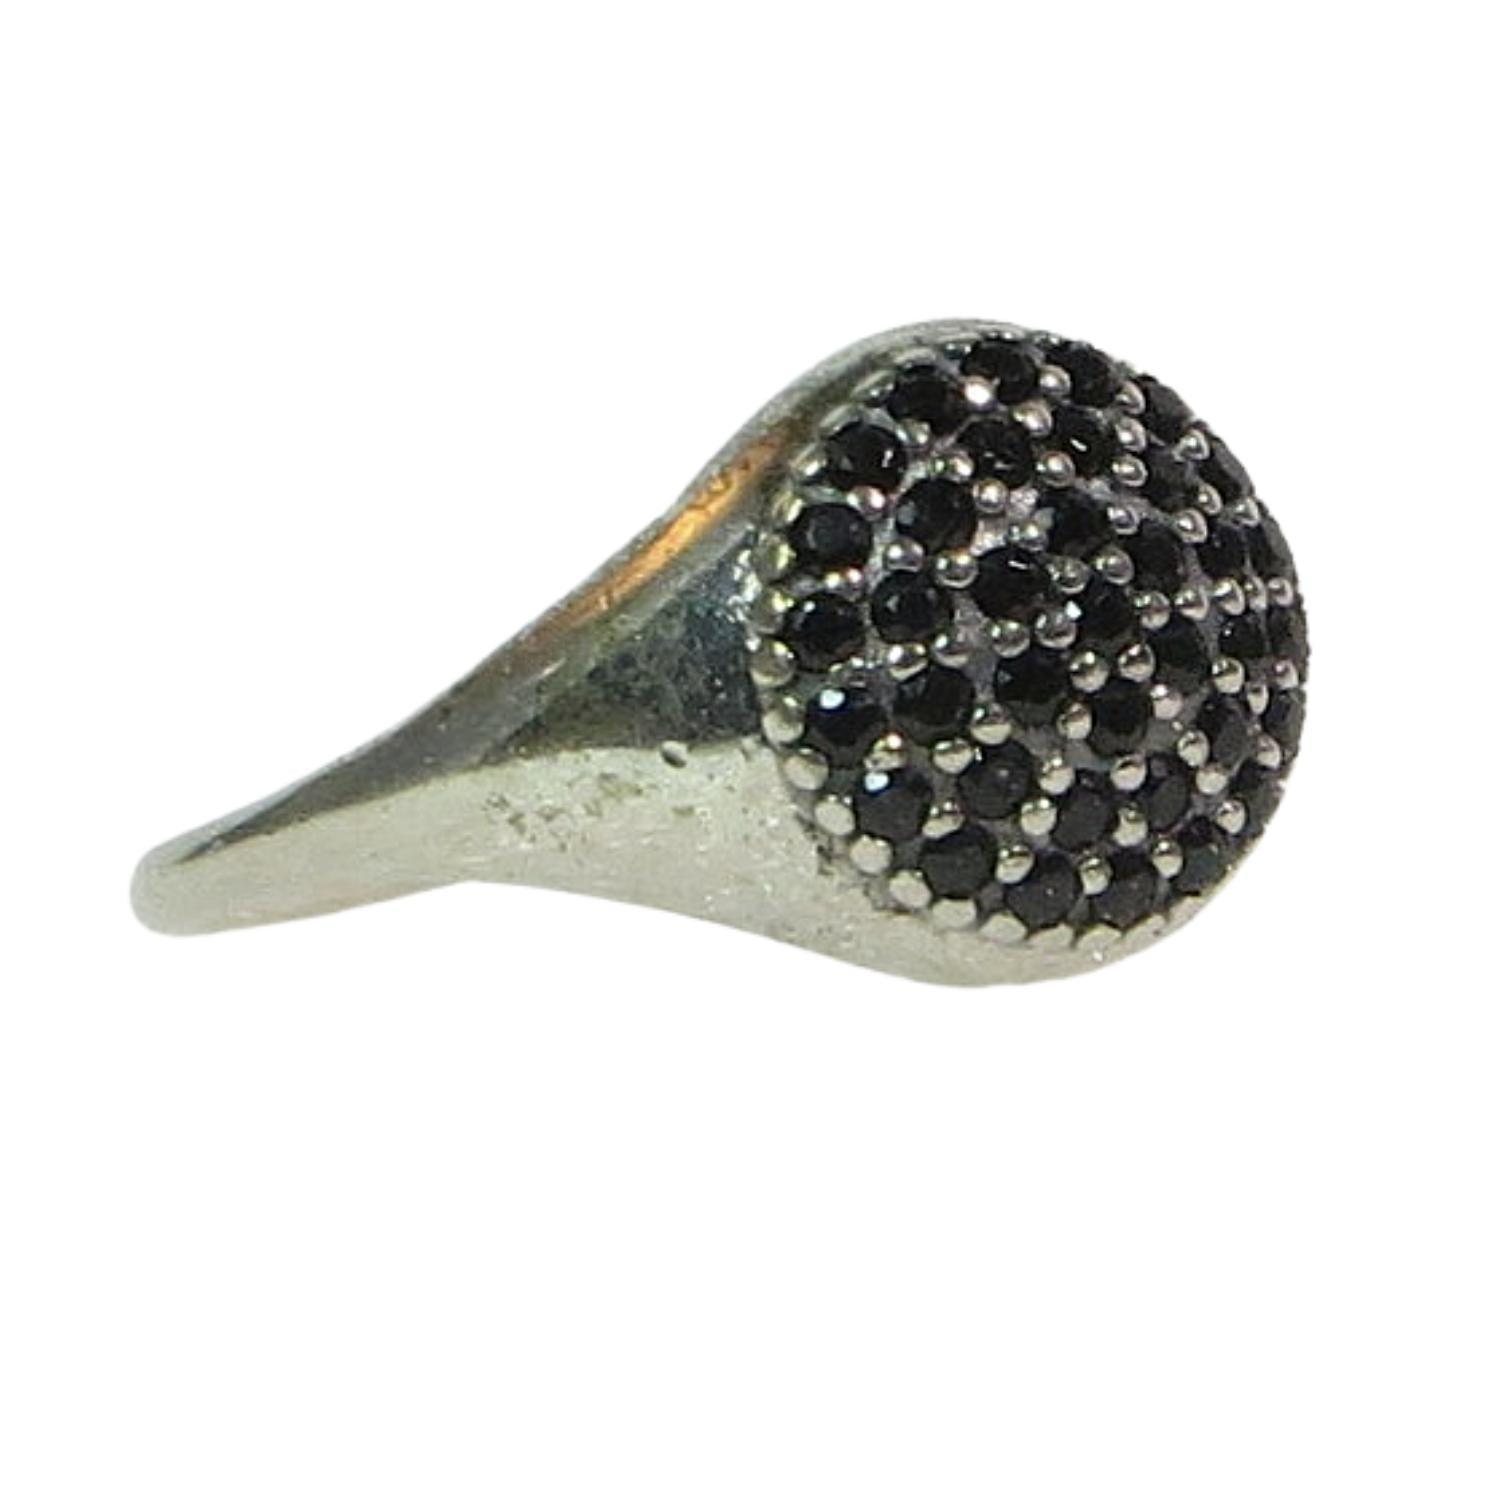 Pandora Pave Black Sterling Silver and Black CZ Ring 190888NCK.  A circle of pave black CZs tops a smooth sterling band.